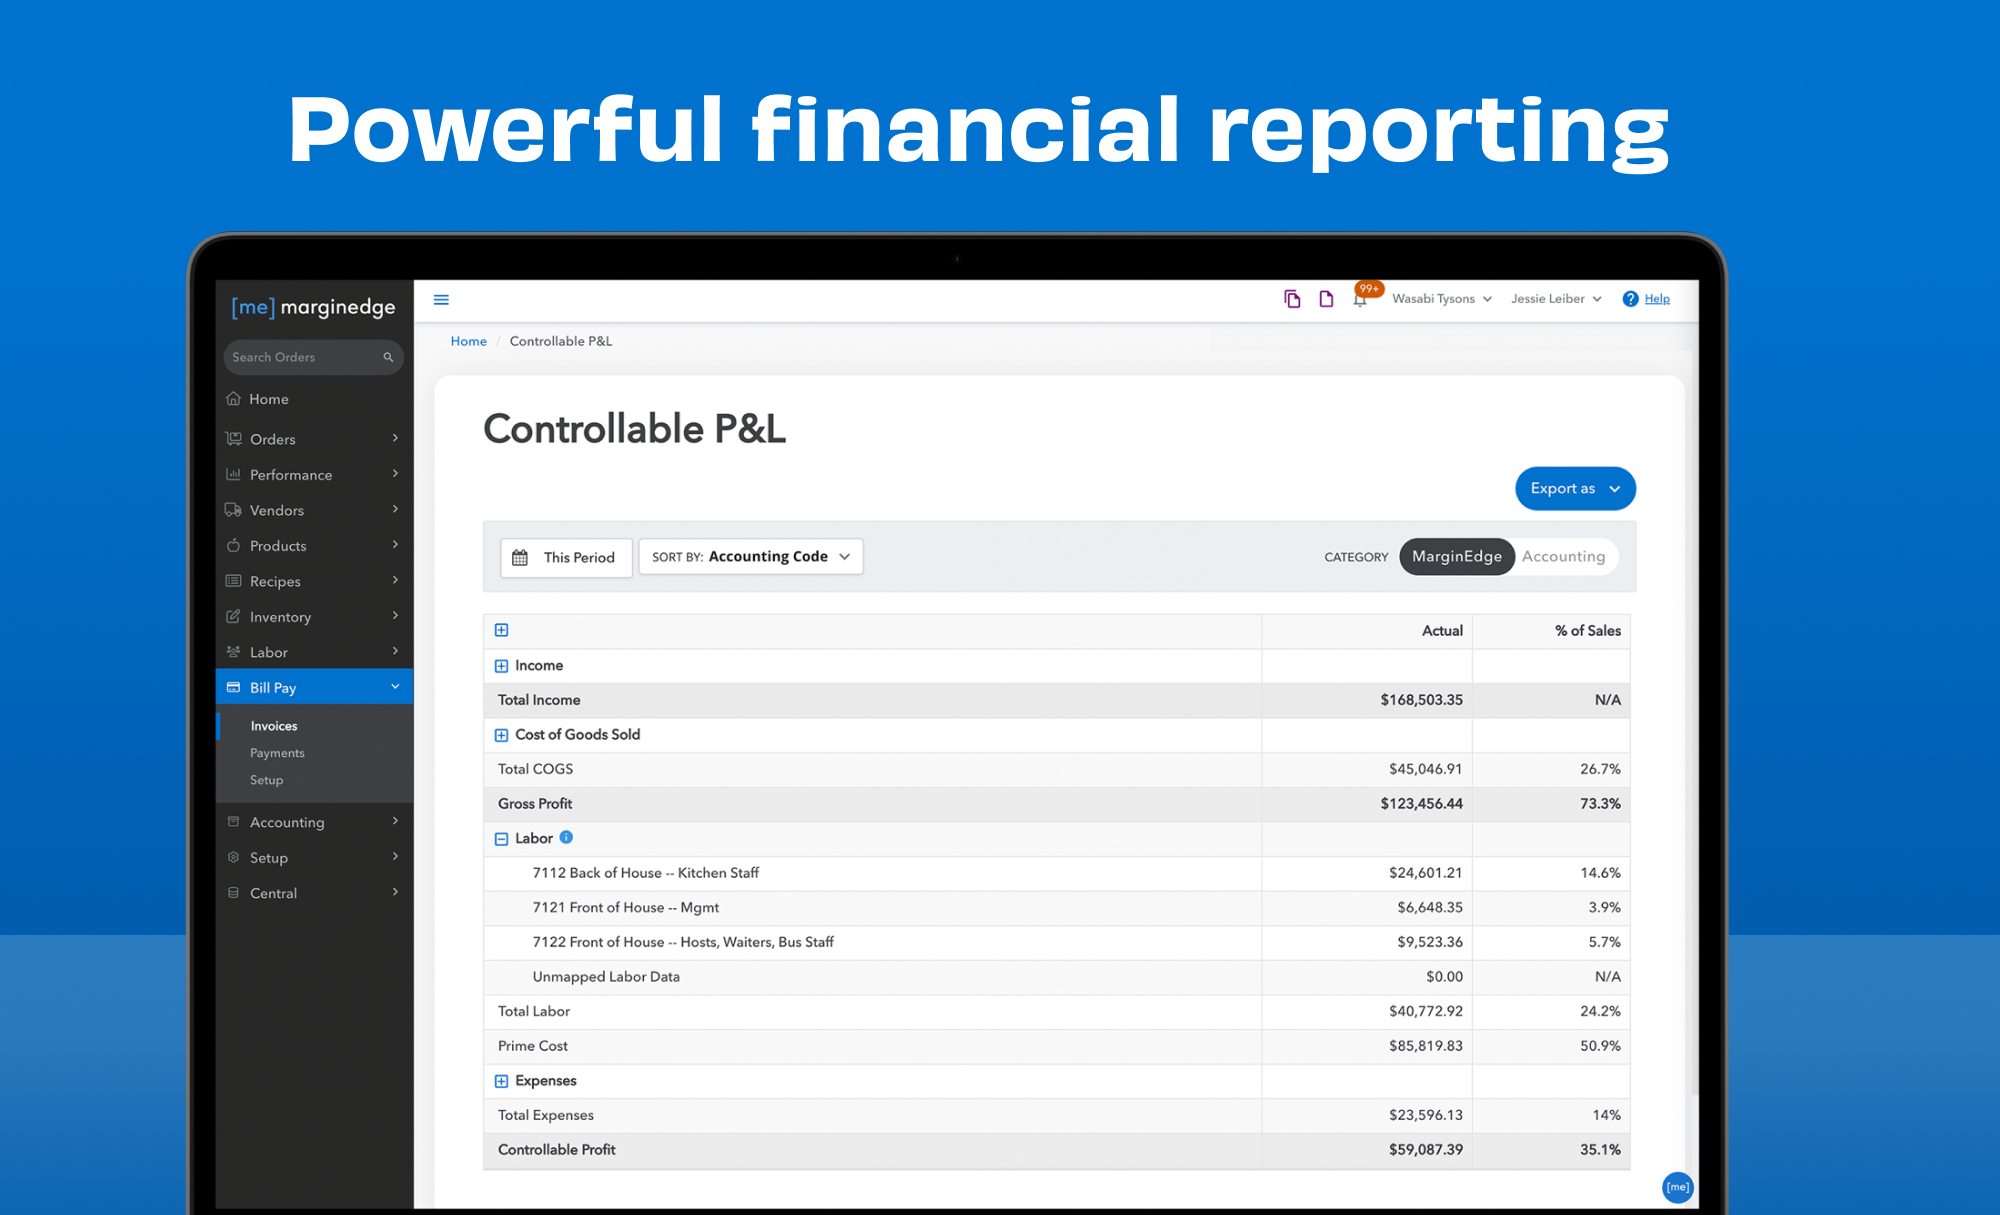 MarginEdge uses POS and invoice data to generate powerful reports. Get a daily controllable P&L, track food and labor costs in real time, see actuals vs. theoreticals, track budgets, and more all from one central location.